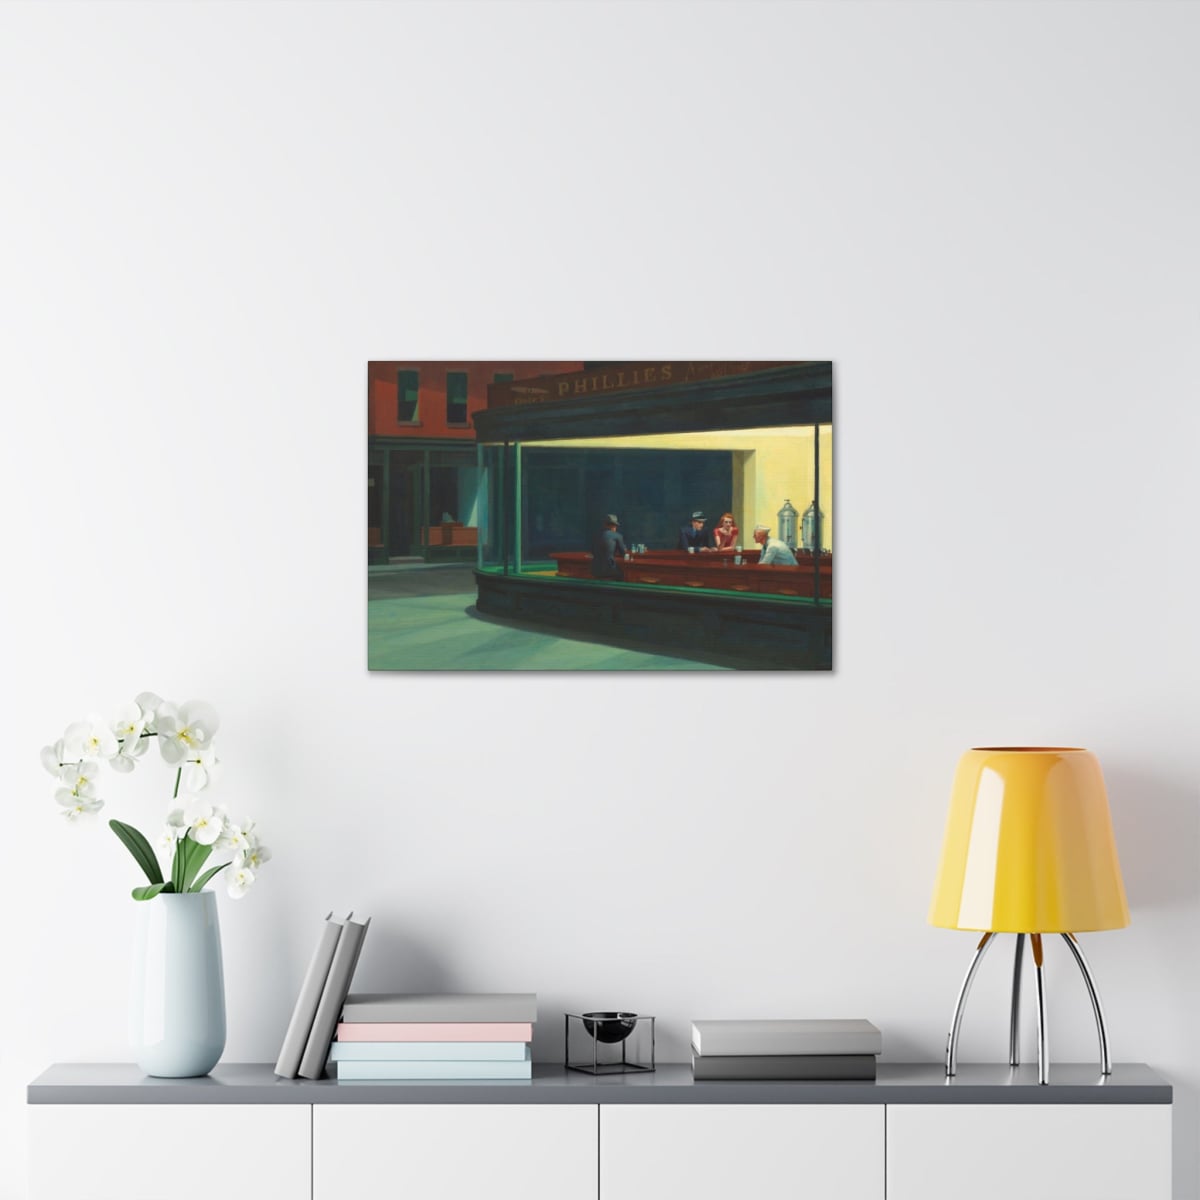 Timeless Classic Art for Your Home Decor